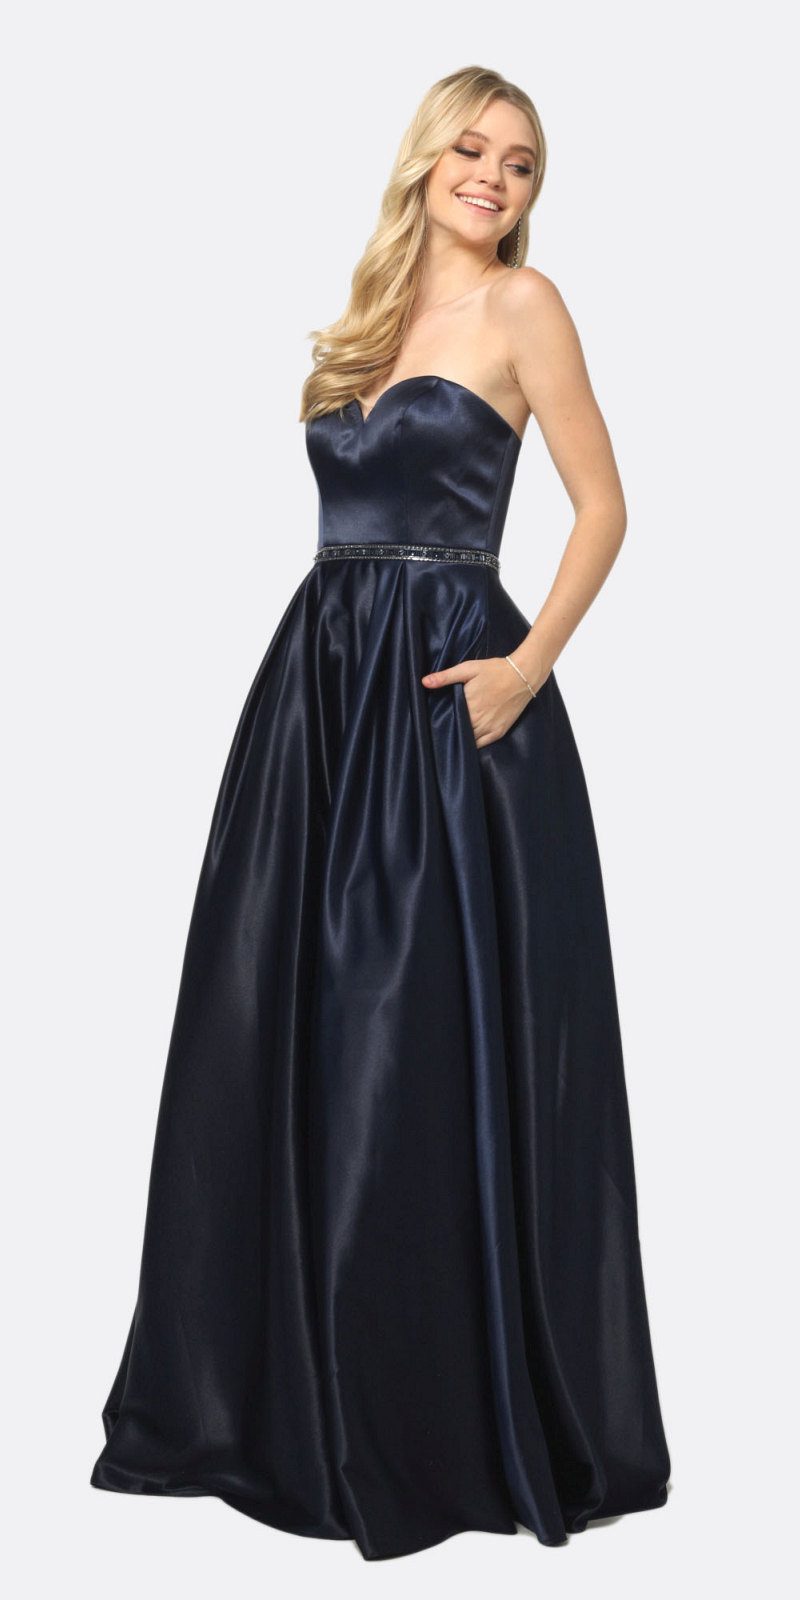 Juliet 687 Shiny Satin A Line Gown Navy Blue With Beaded Belt And Pockets